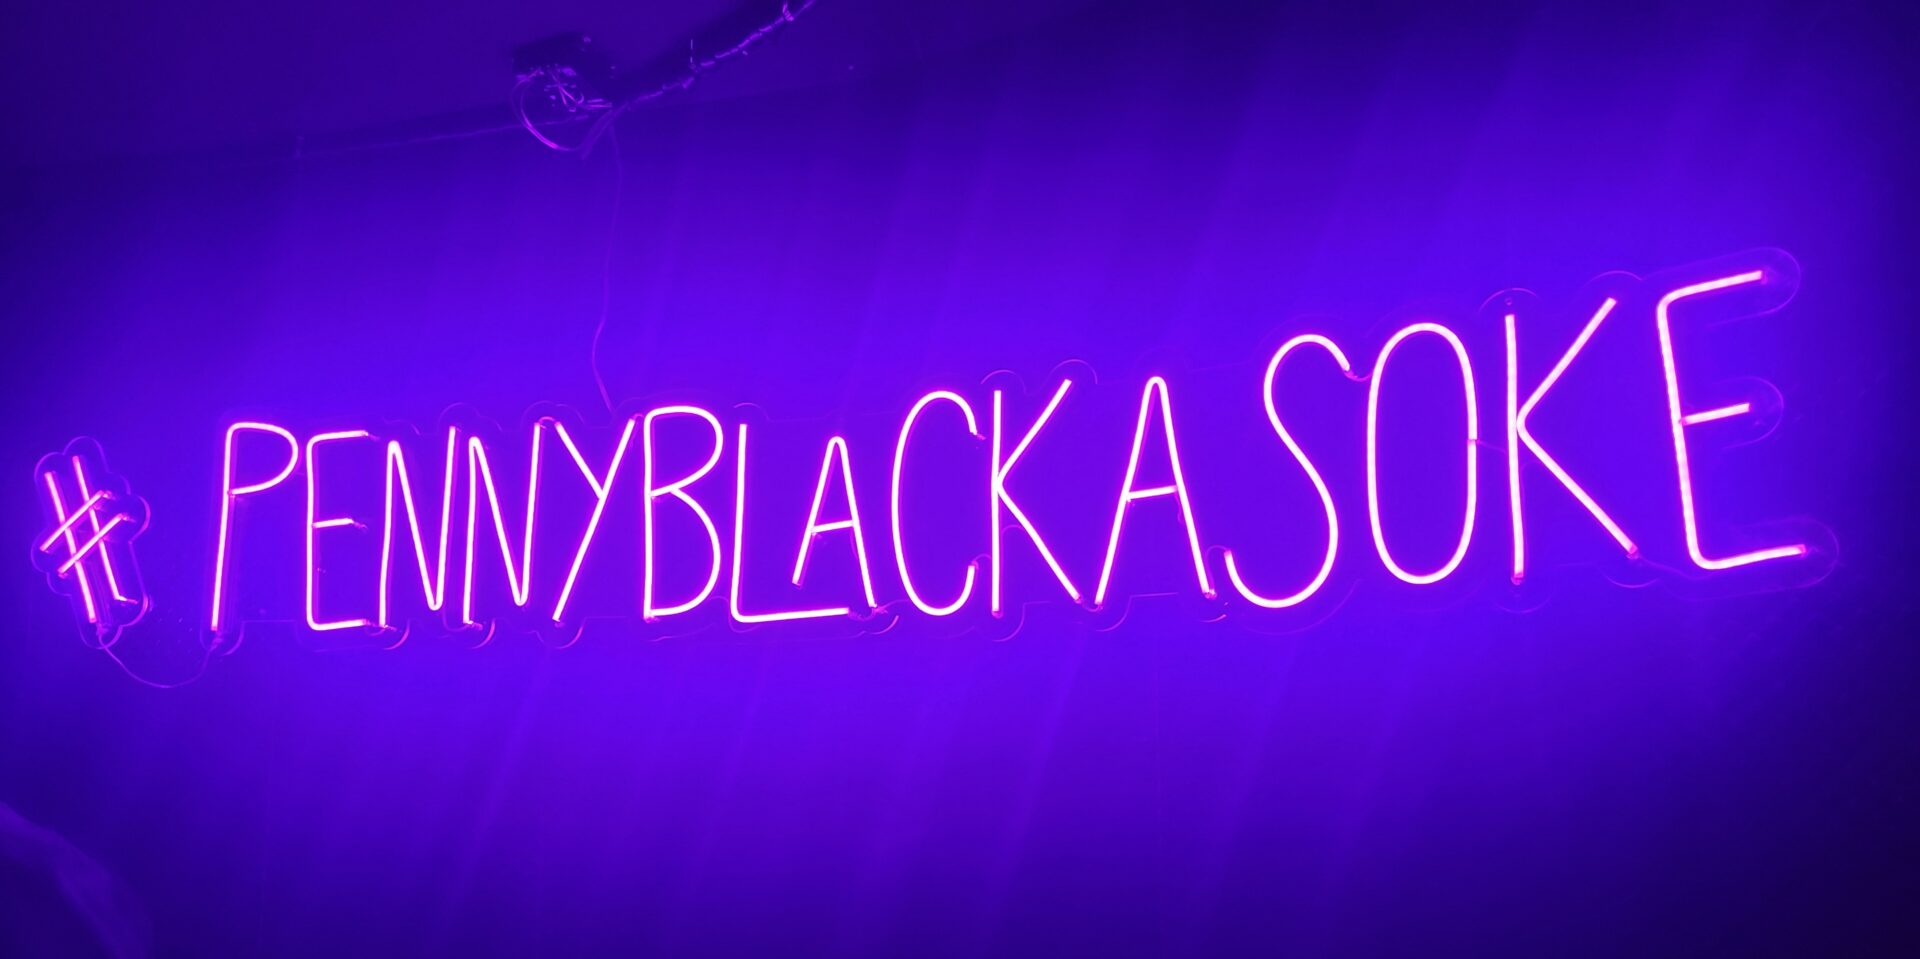 a purple neon sign with text